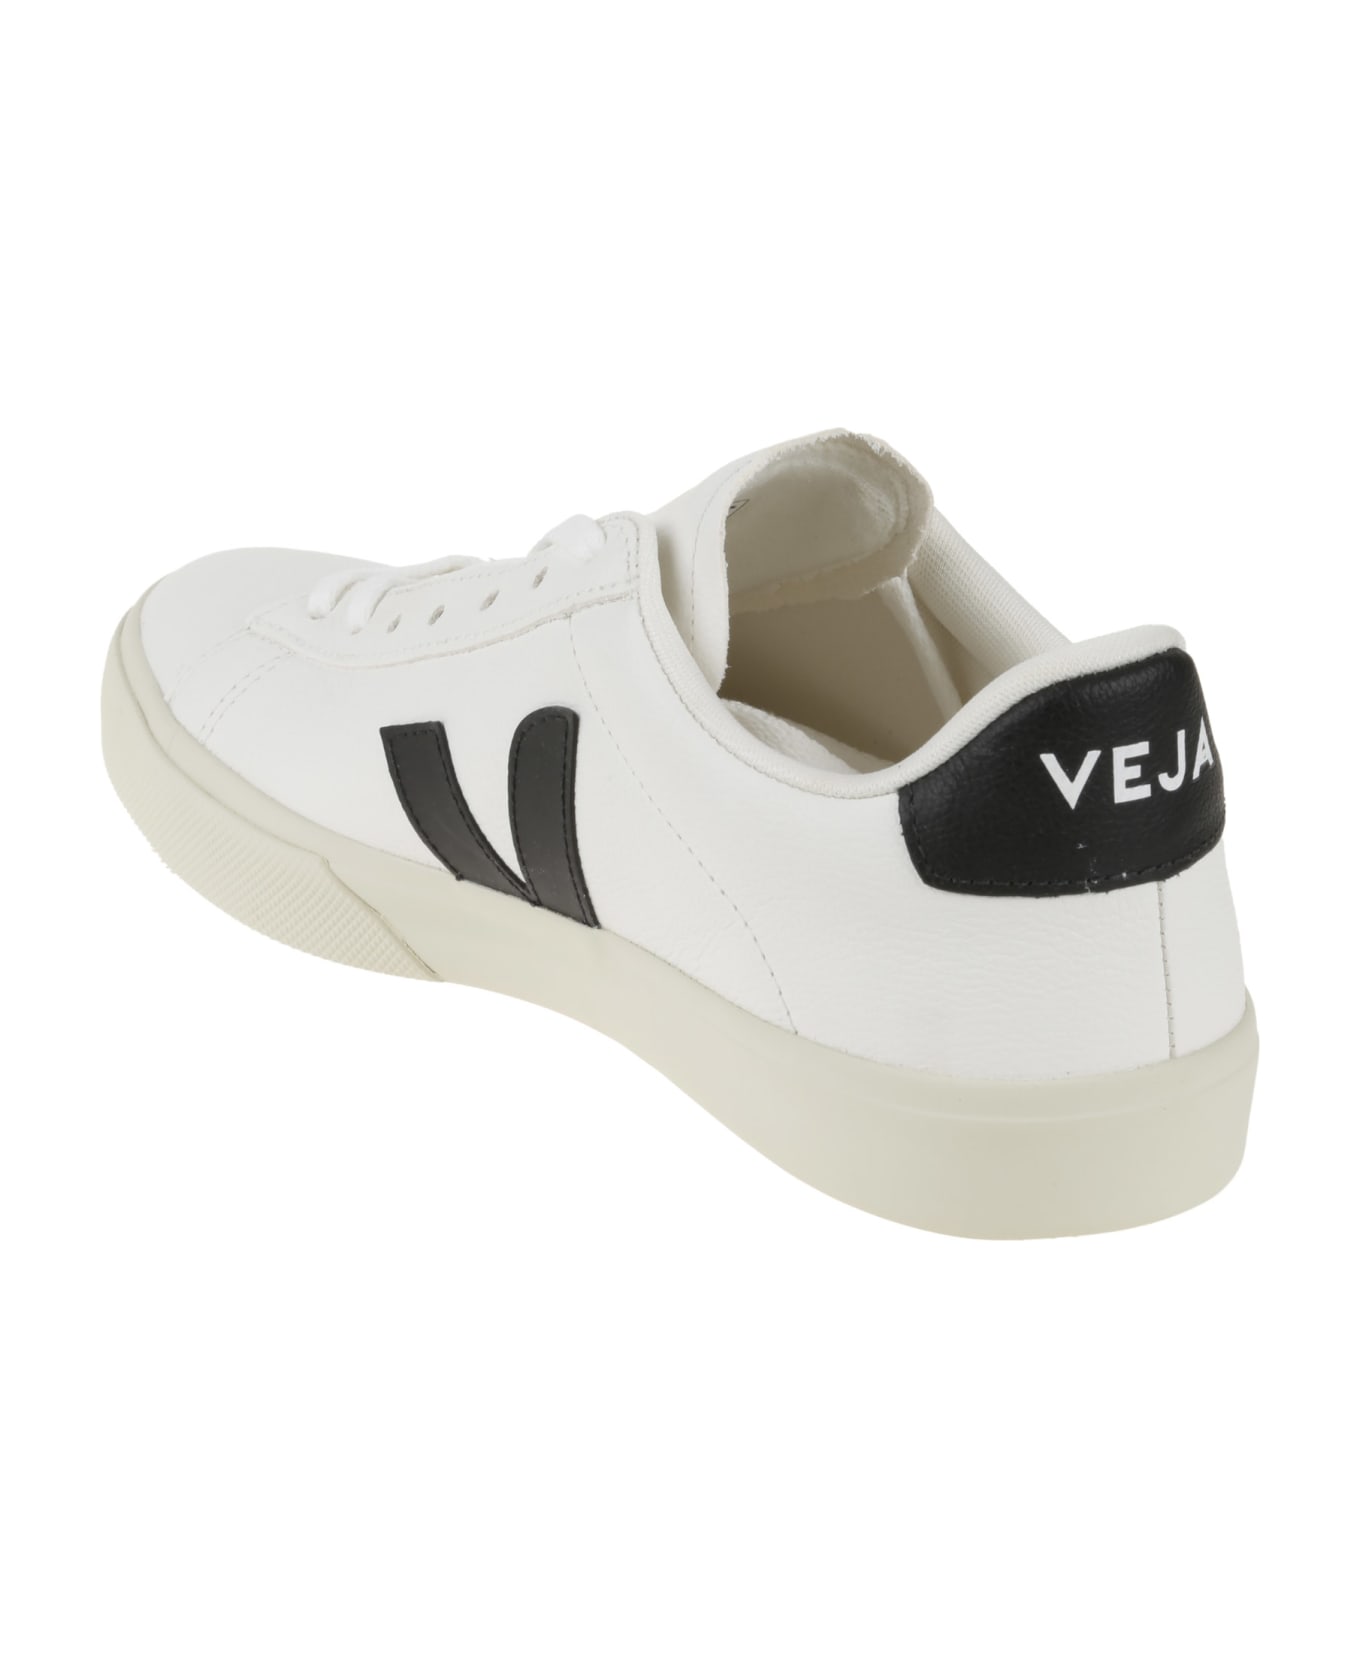 Veja Campo Low-top Sneakers - Black